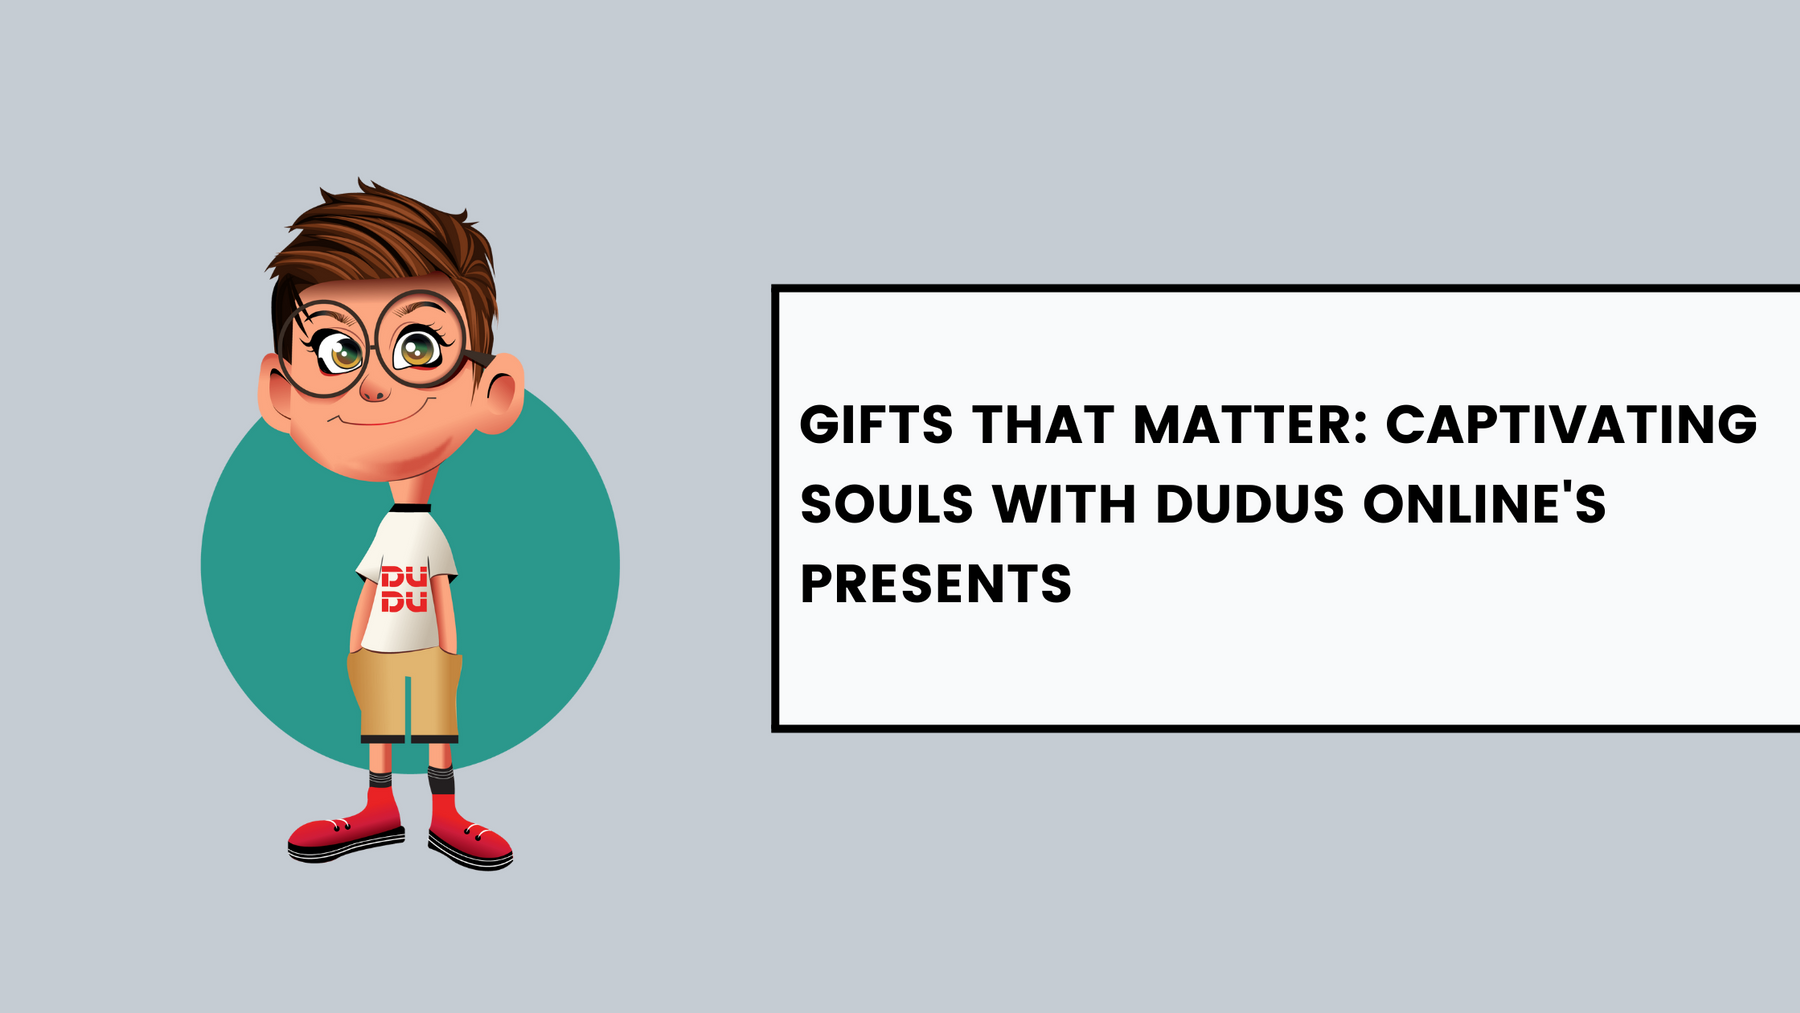 Gifts That Matter: Captivating Souls With Dudus Online's Presents